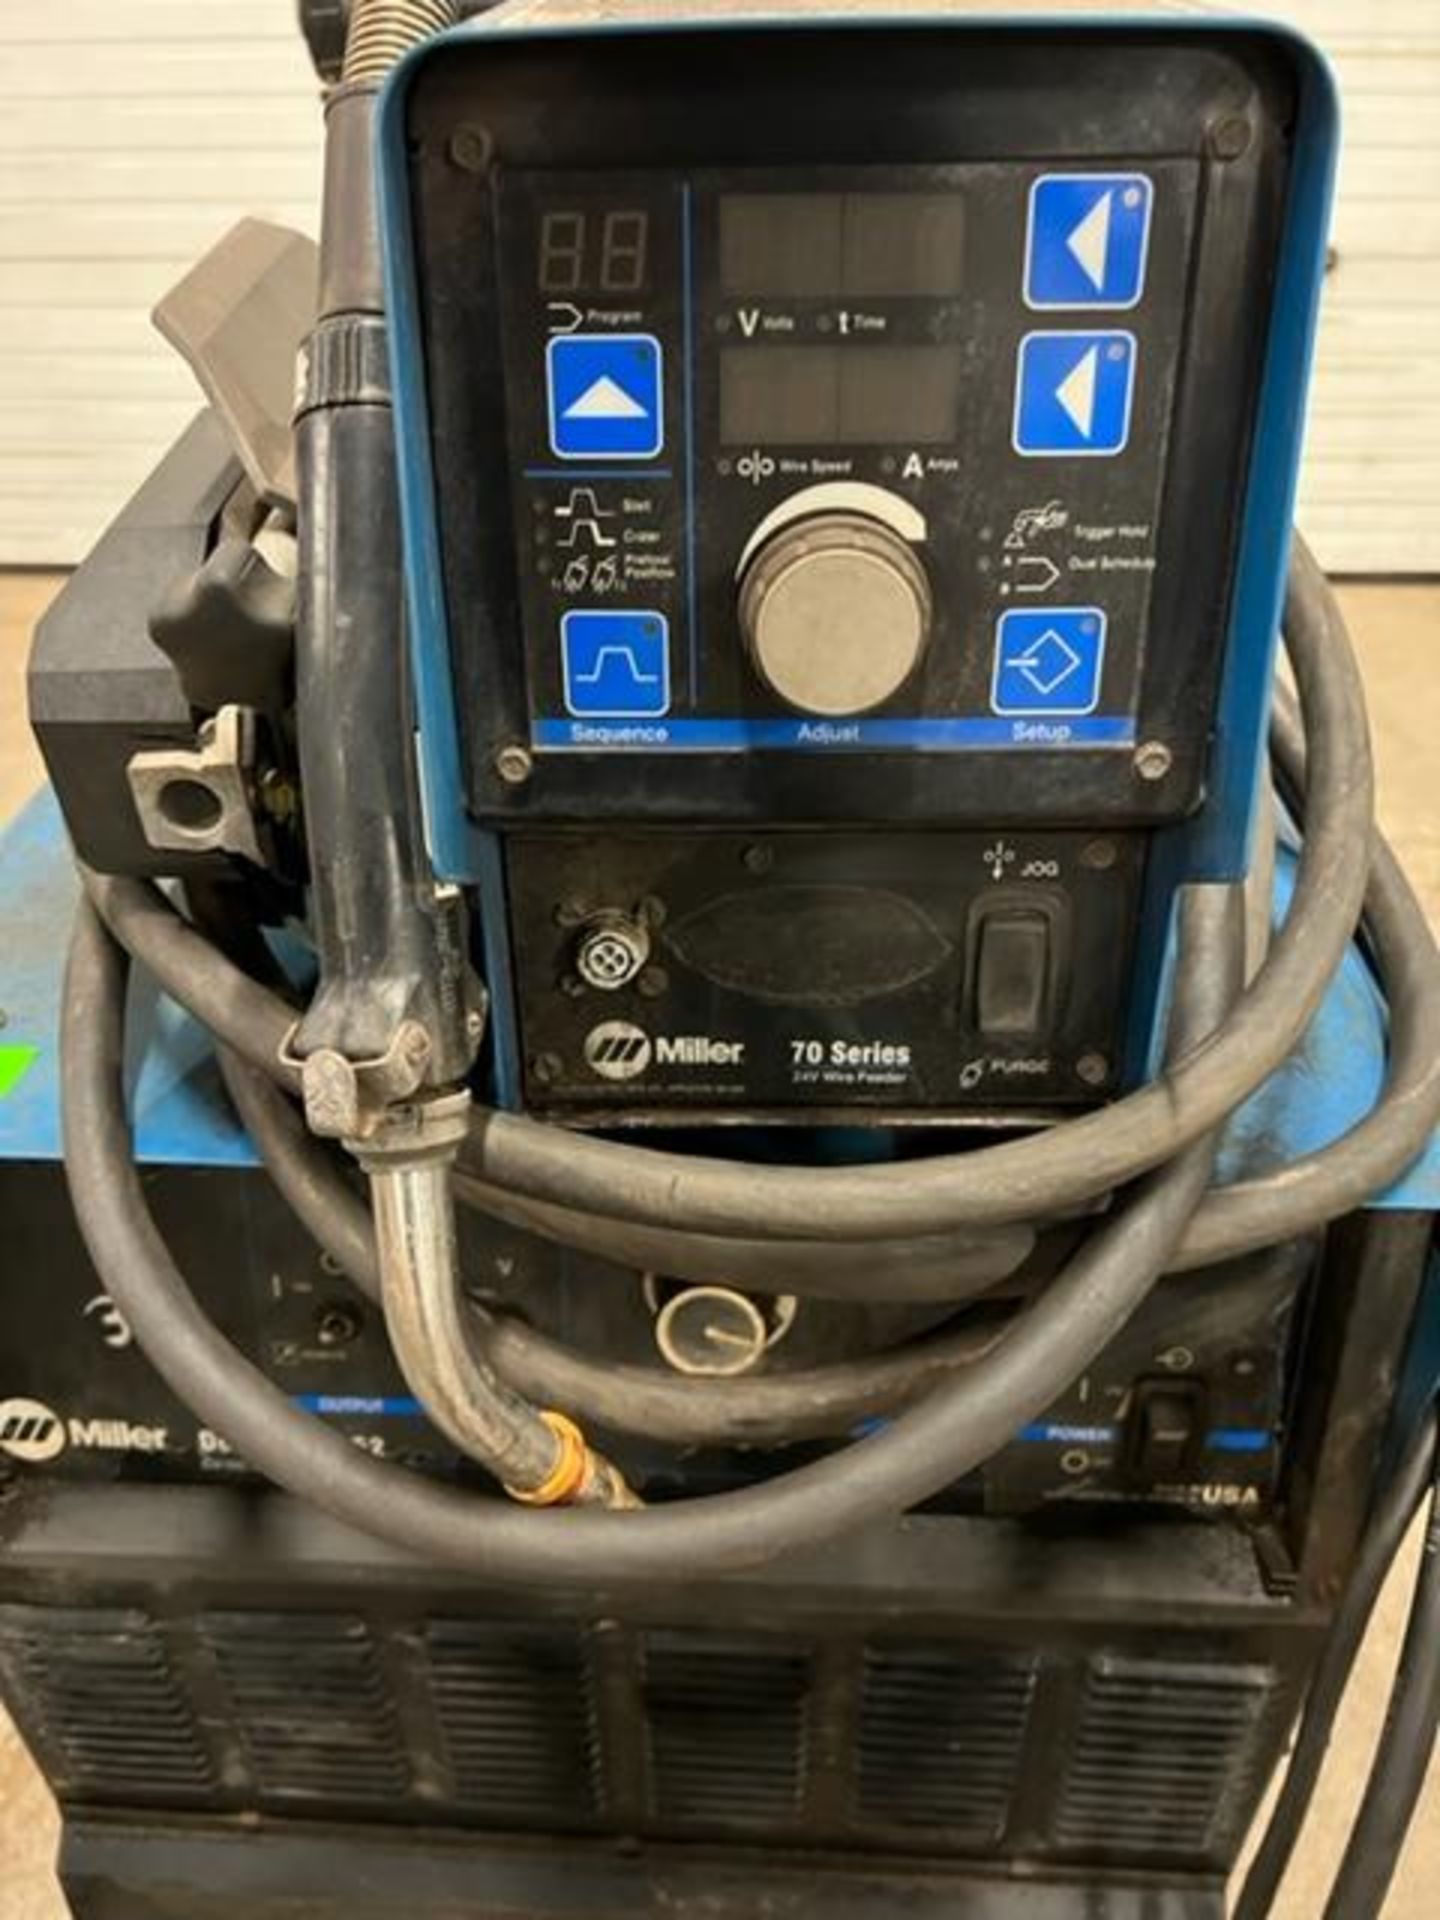 Miller Deltaweld 652 Mig Welder 650 Amp with 70-S WIRE FEEDER 4-wheel COMPLETE with Mig Gun and - Image 2 of 2